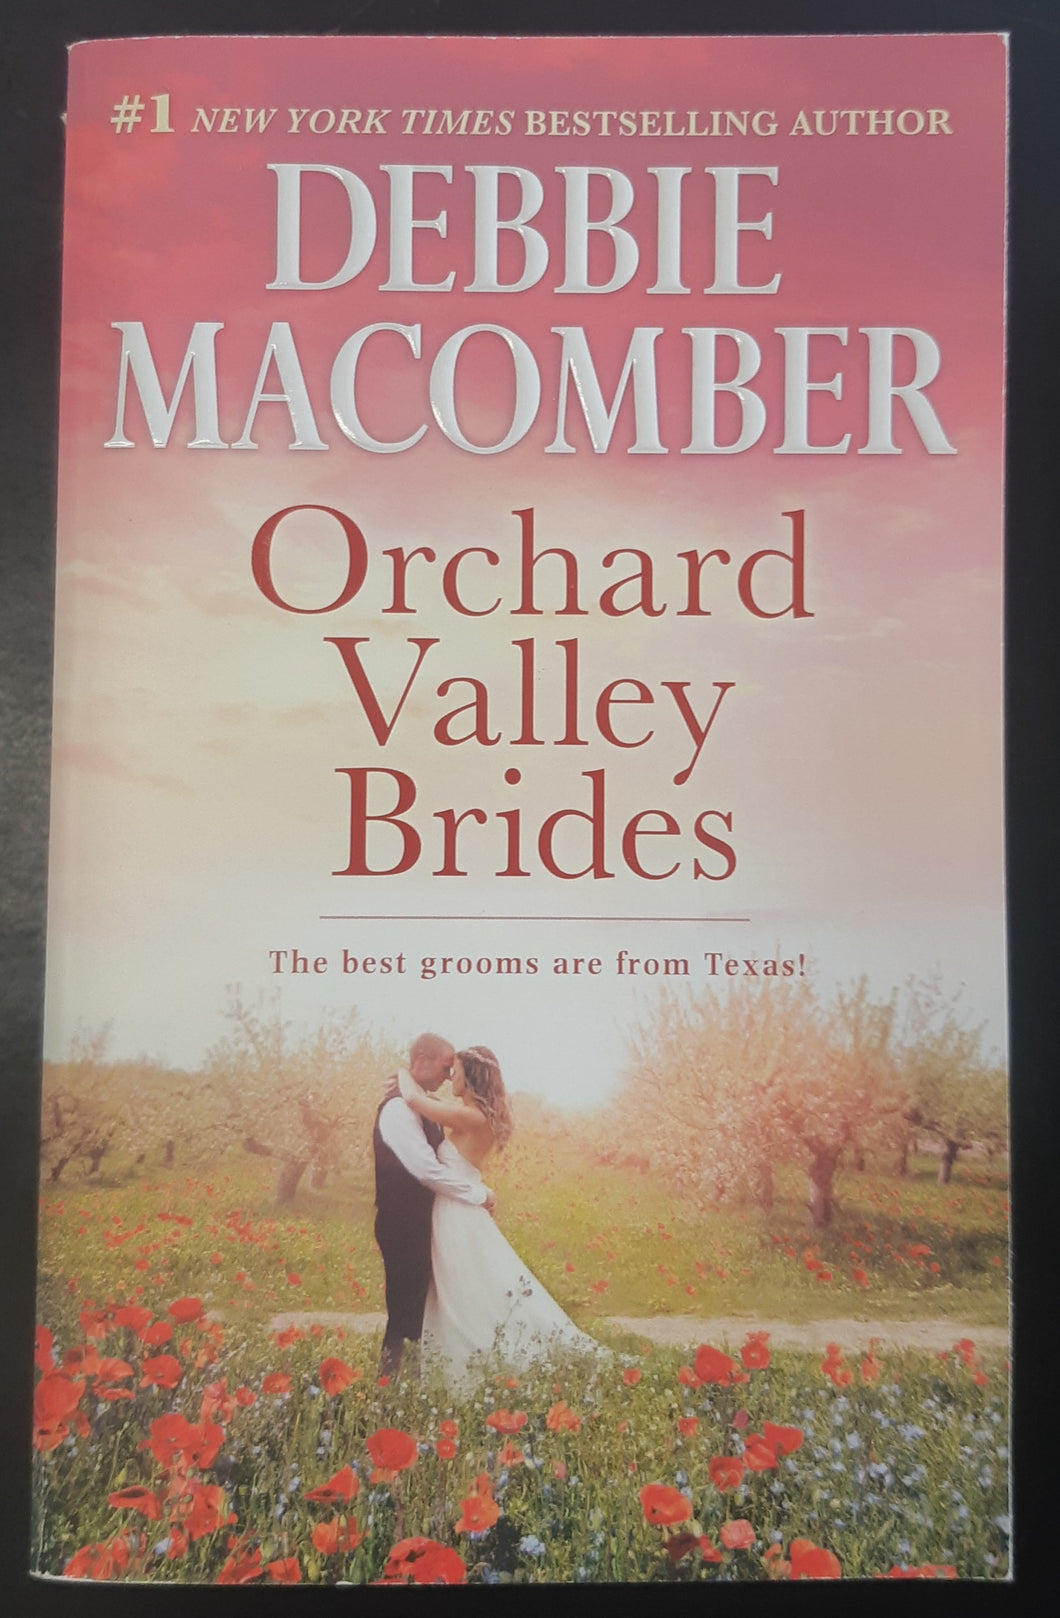 Orchard Valley Brides by Debbie Macomber